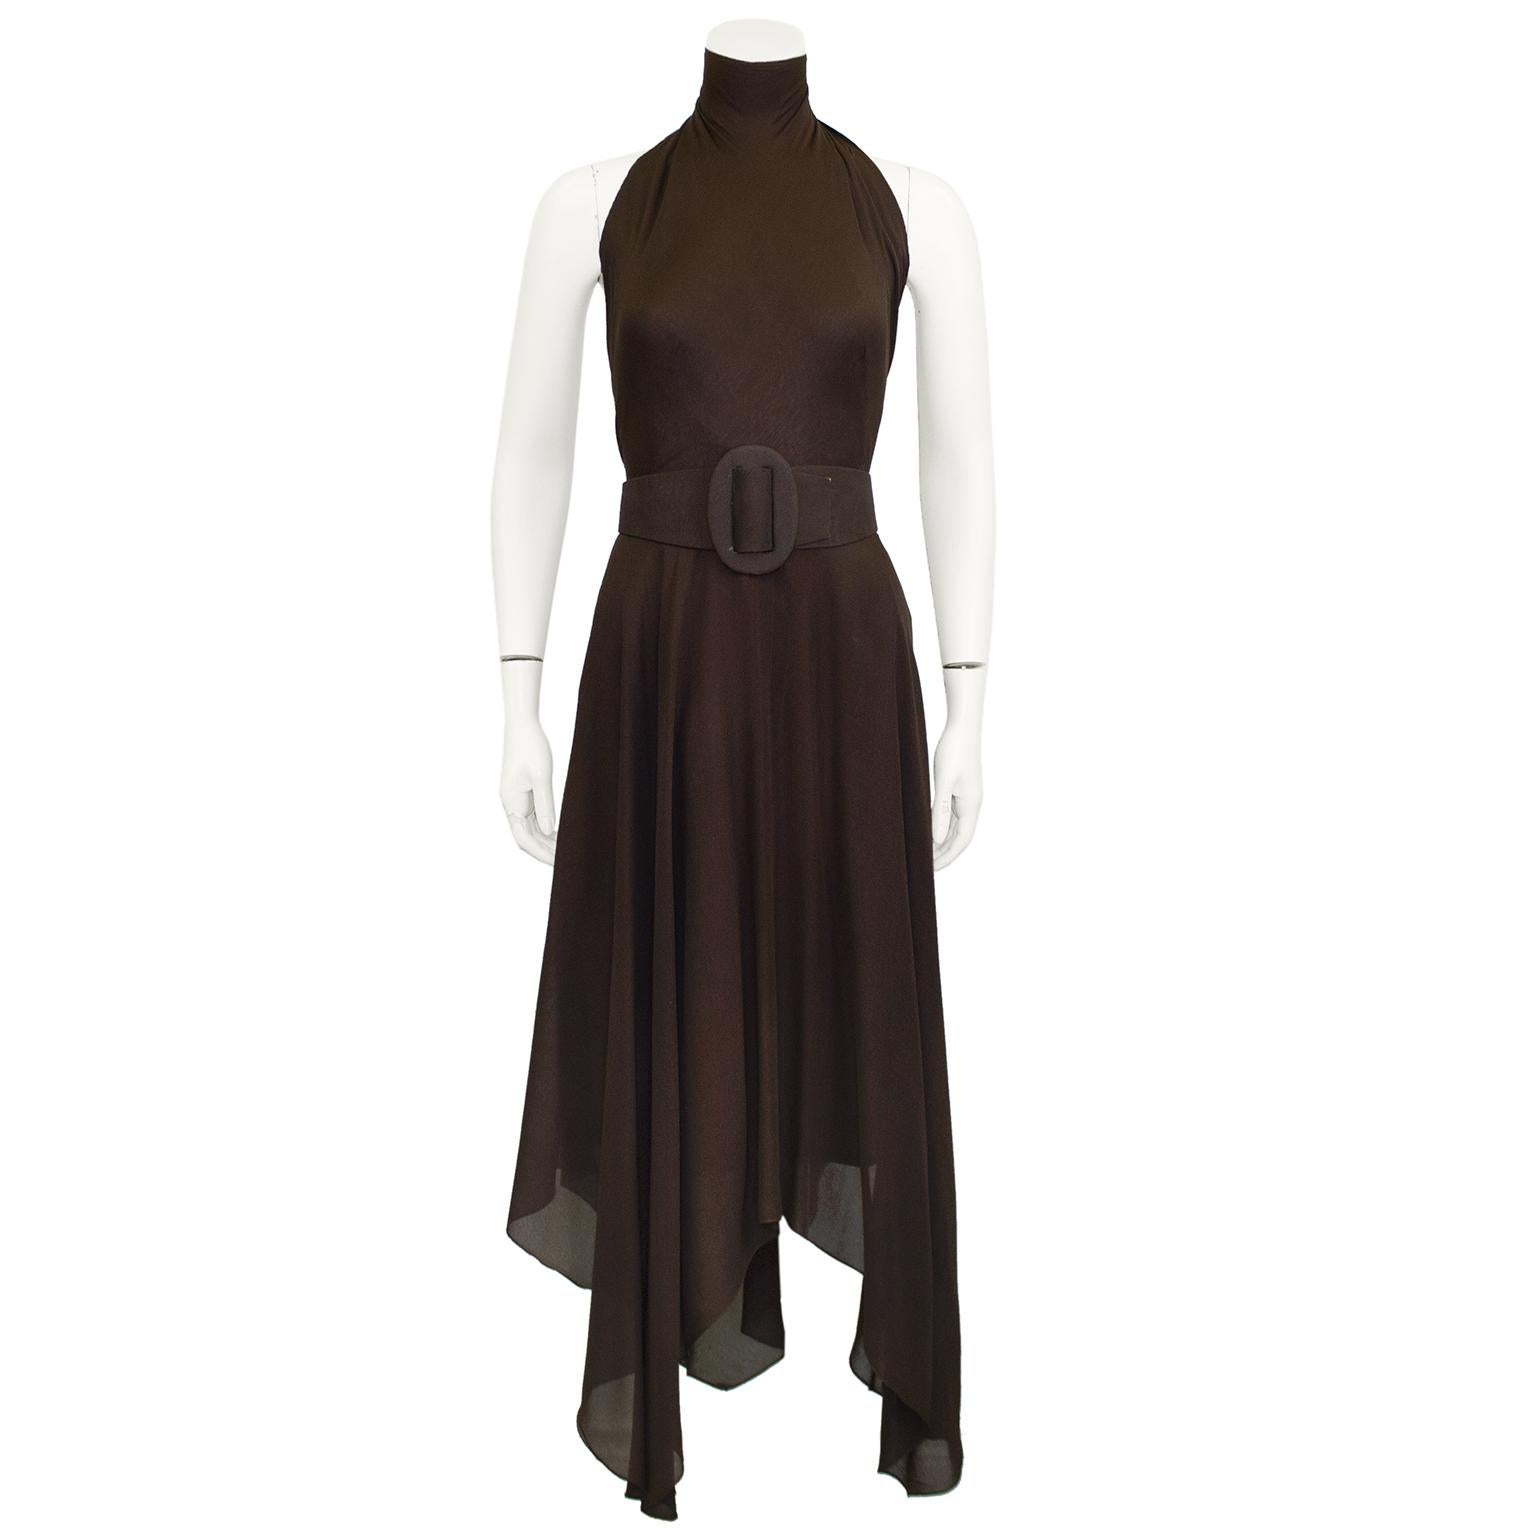 Stunning chocolate brown silk chiffon Pauline Trigère halter gown with matching chiffon overlay. Previously owned by a well know American celebrity performer who favoured Trigère, Chanel and Galanos for her performance and personal wardrobe. Best